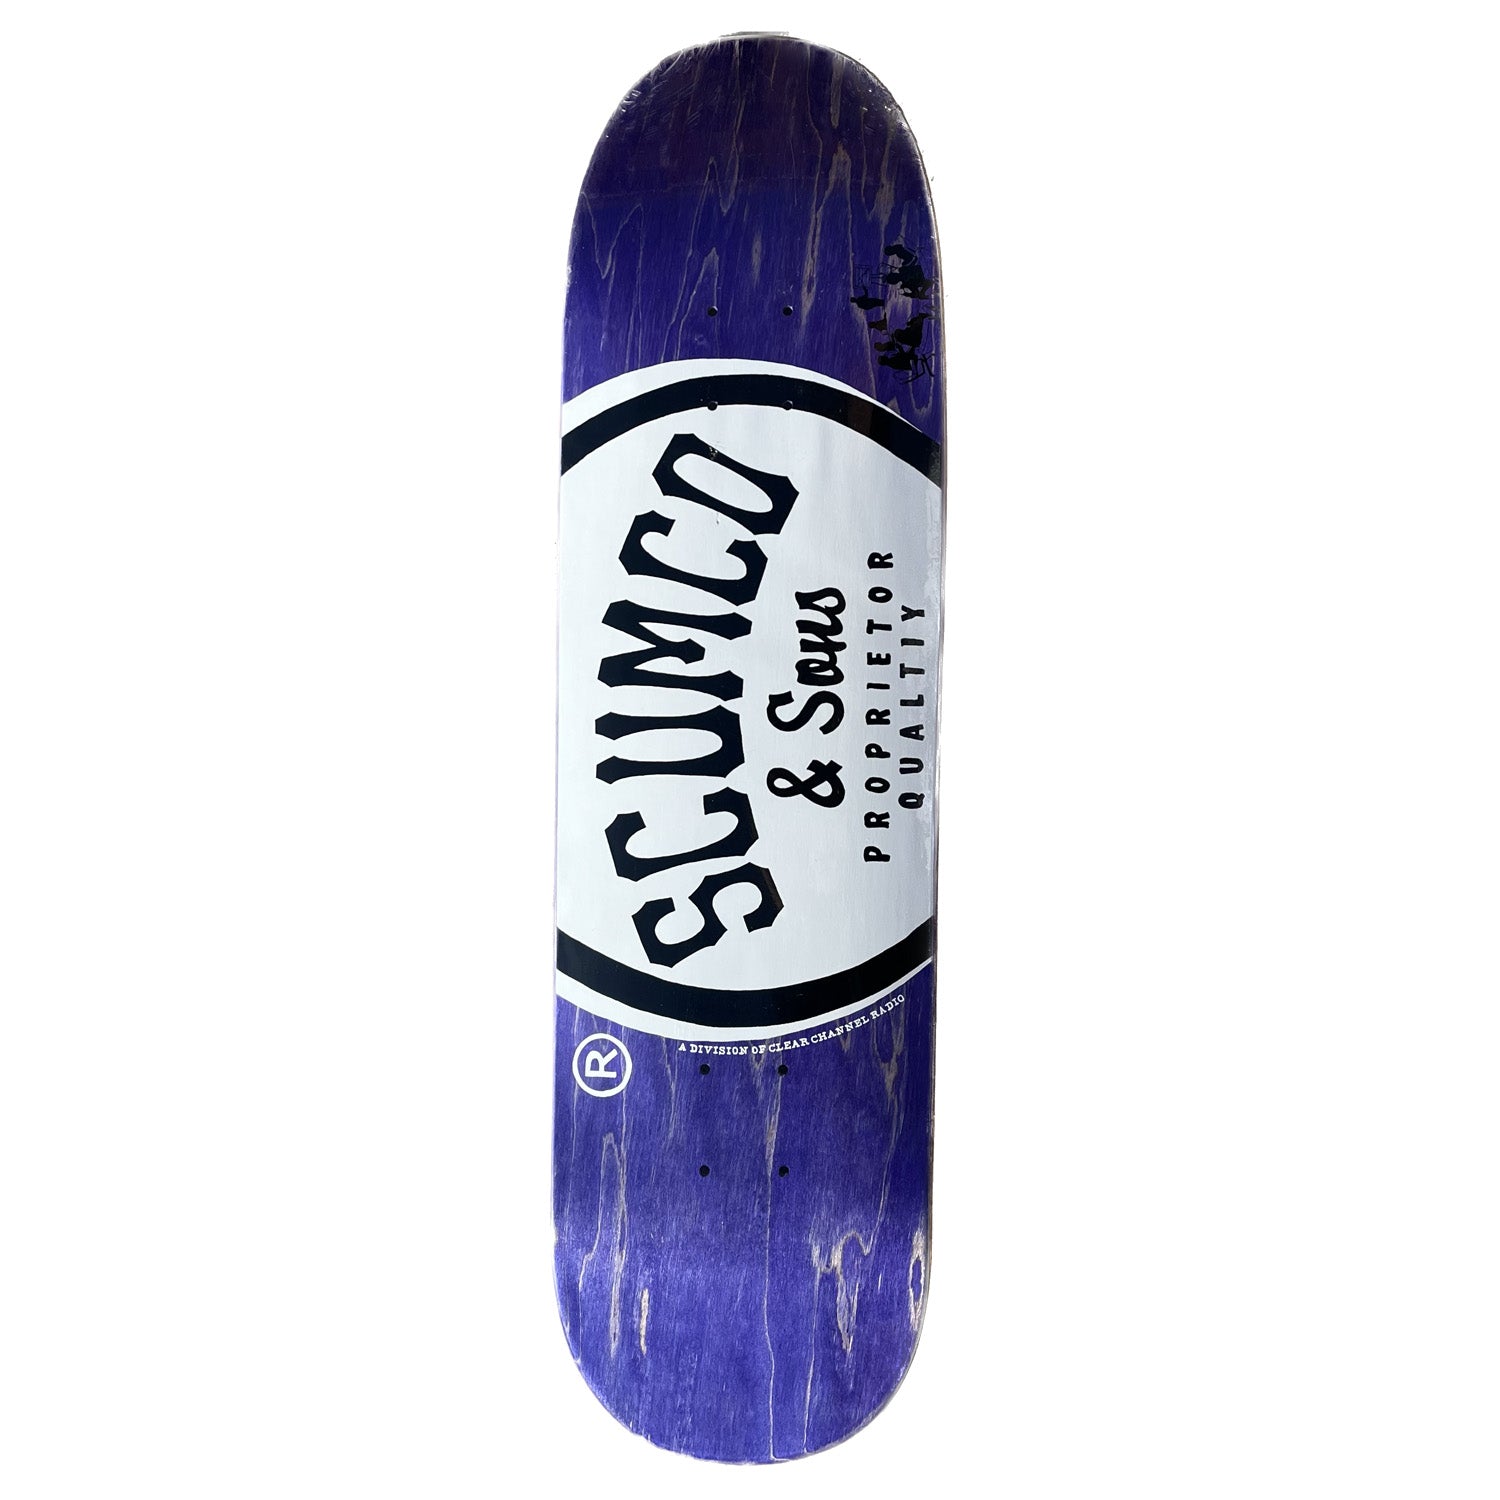 Scumco & Sons Logoboard Deck 8.5" Shaped